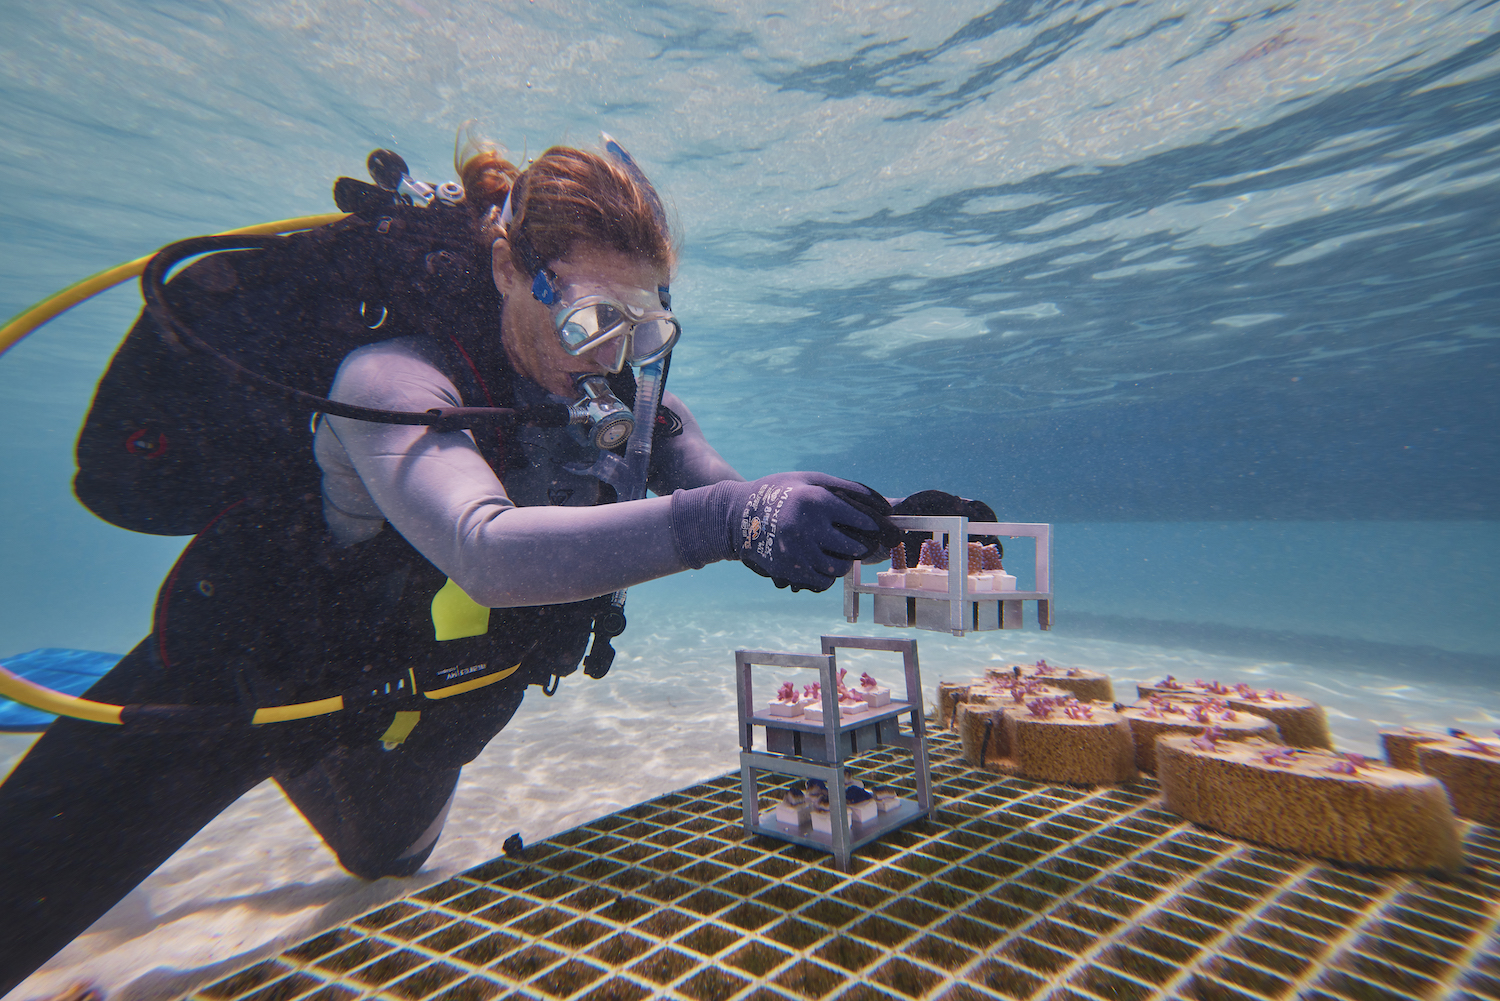 Dr. Foster plants seeded coral skeletons at coral reefs 